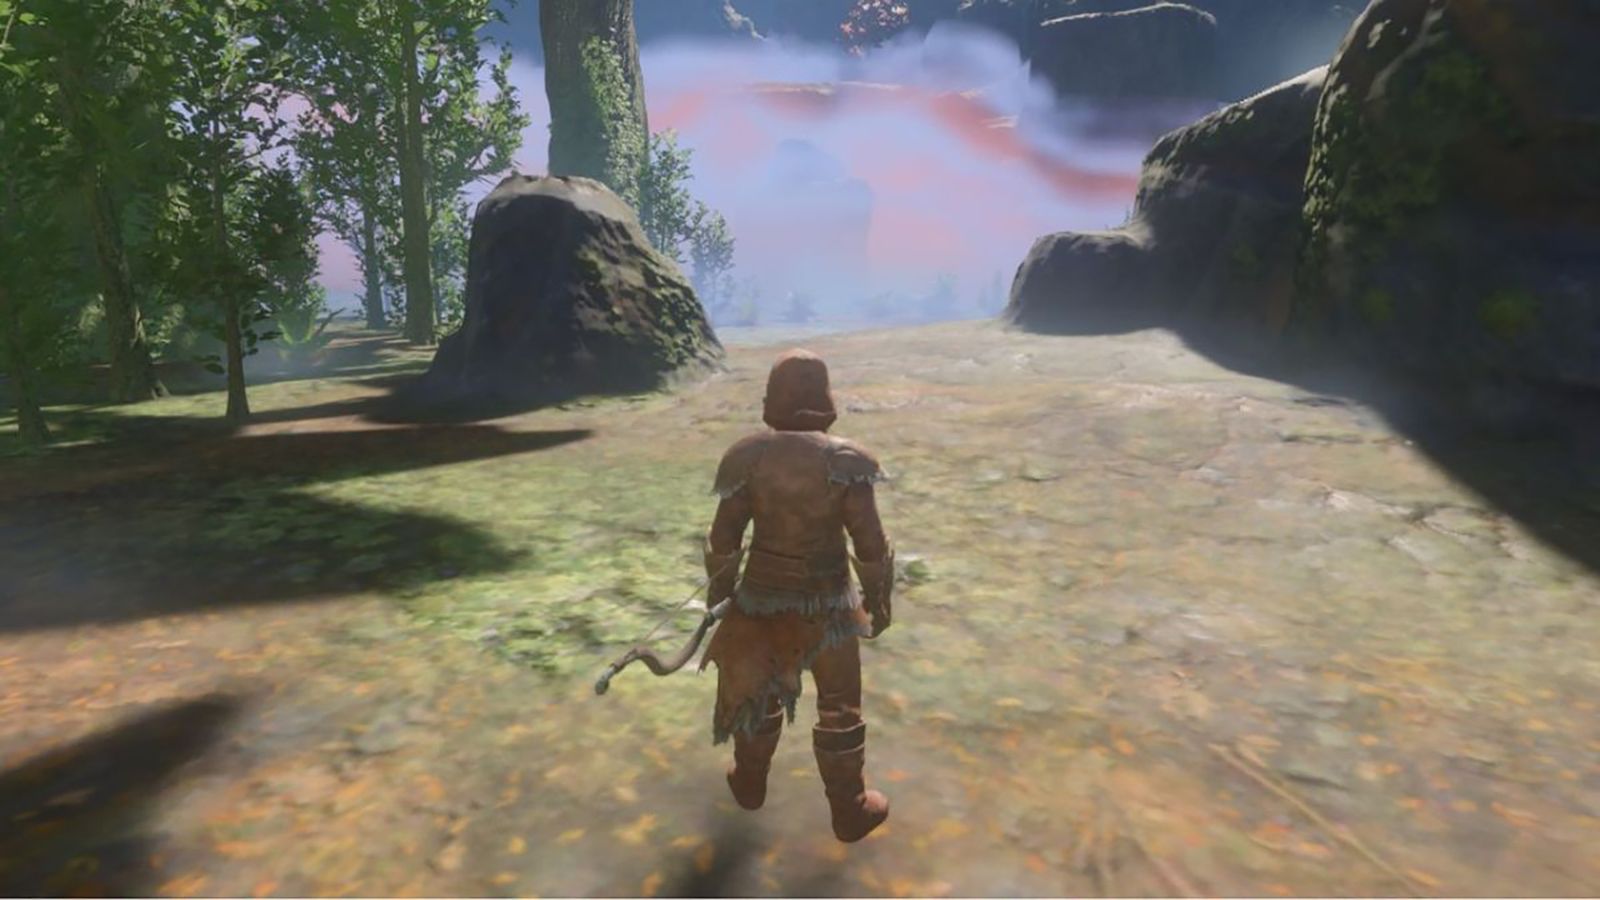 Enshrouded player standing in grass with rocks and trees in background